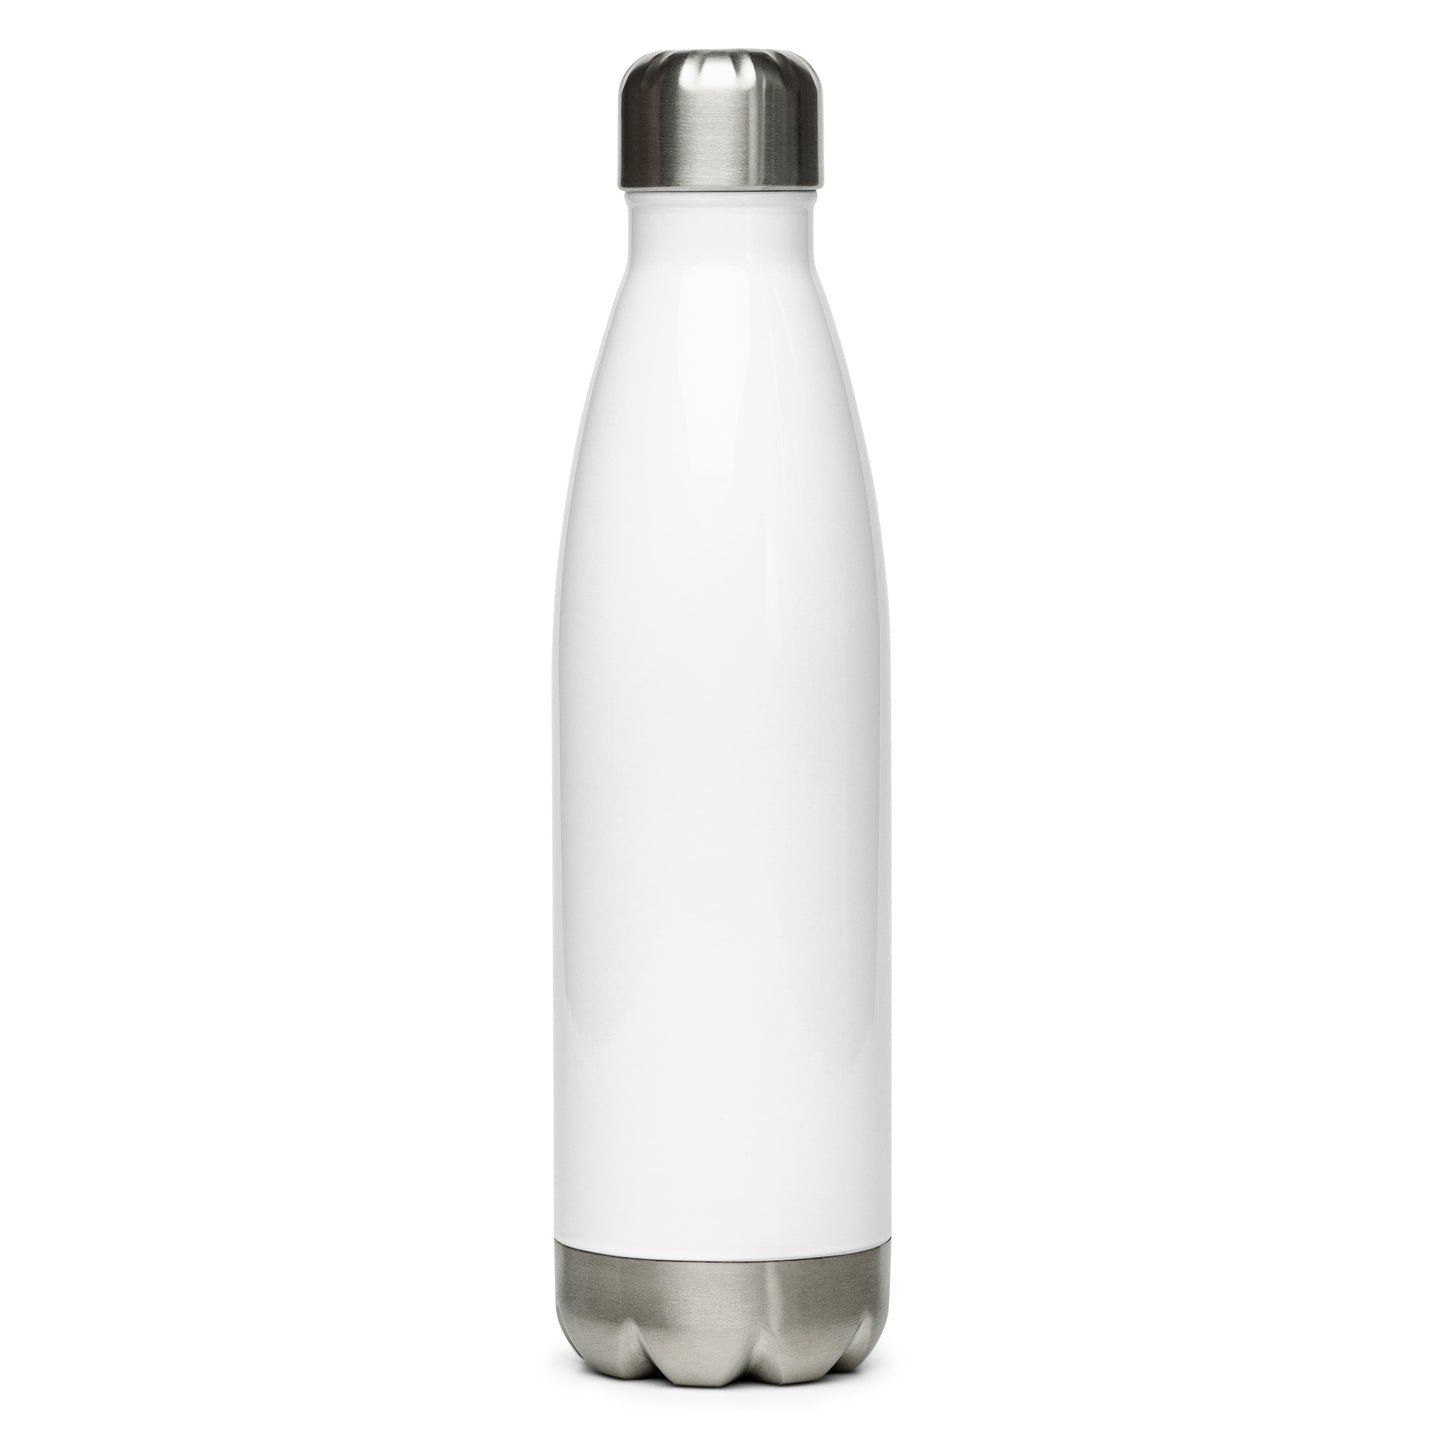 Stainless Steel Water Bottle - Sexy is Timeless